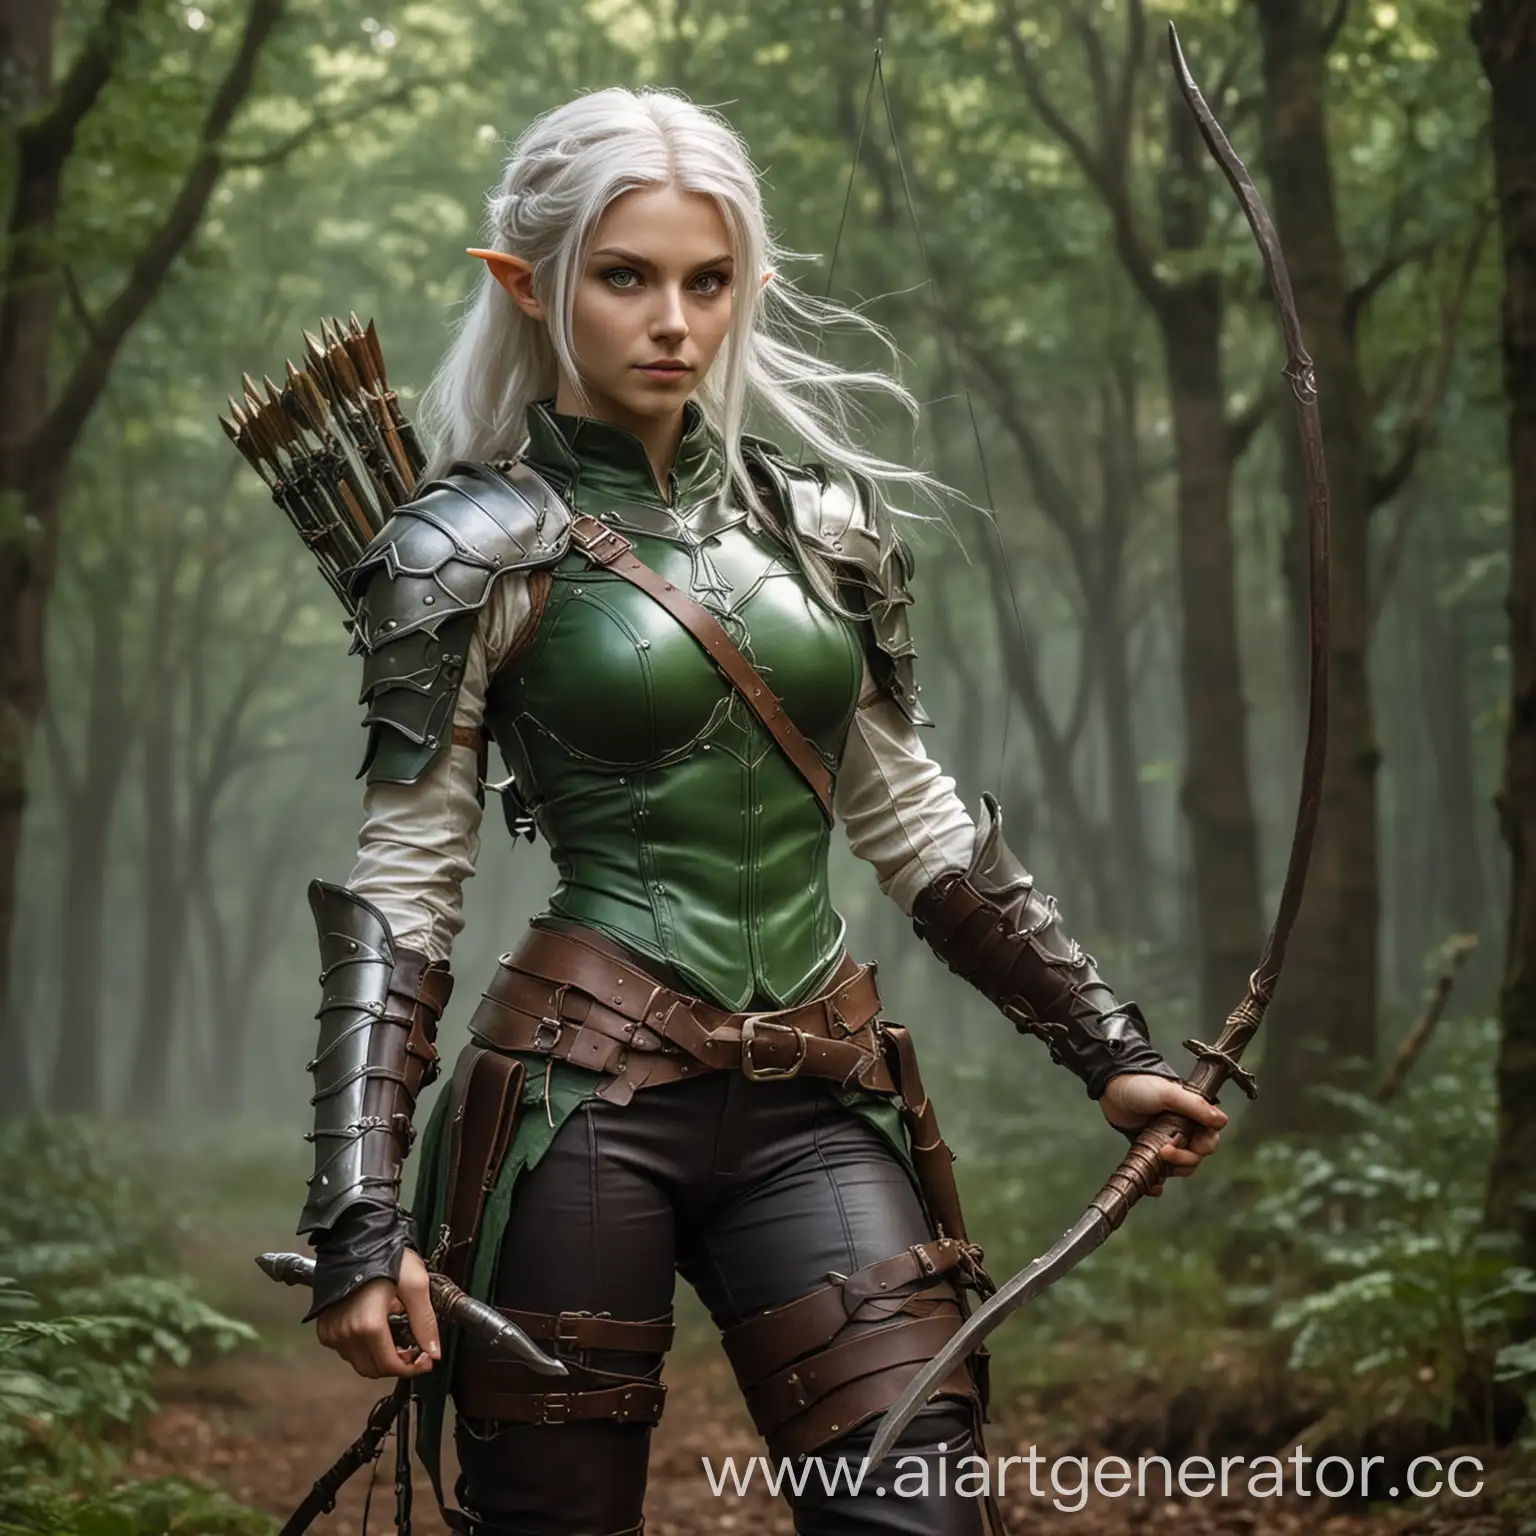 A forest elf with medium-length white hair, a toned body, a size two bust and bright green eyes. She is wearing leather armor, light fabric pants and a shirt under the armor. She has a long bow and quiver on her back, and a scabbard for two short swords is attached to her belt.
